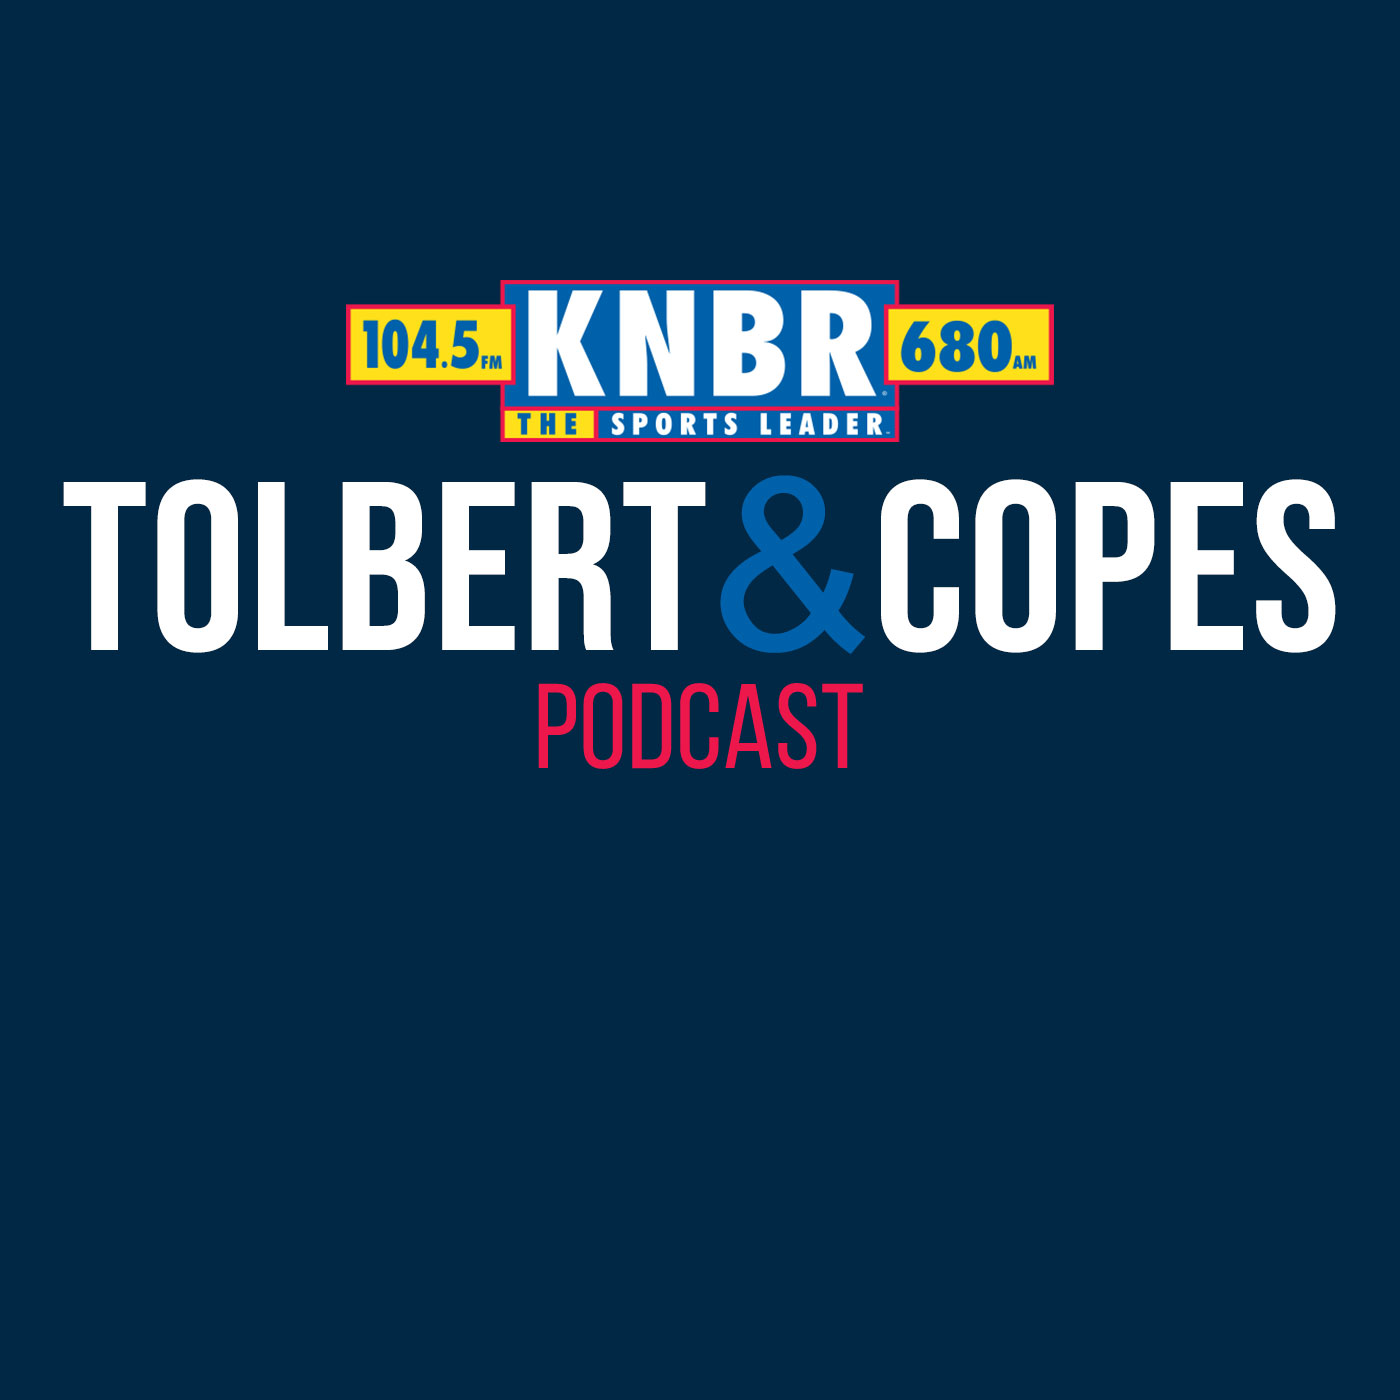 5-23 Marc Spears joins Tolbert & Crowley to predict where some NBA free agents could head this offseason